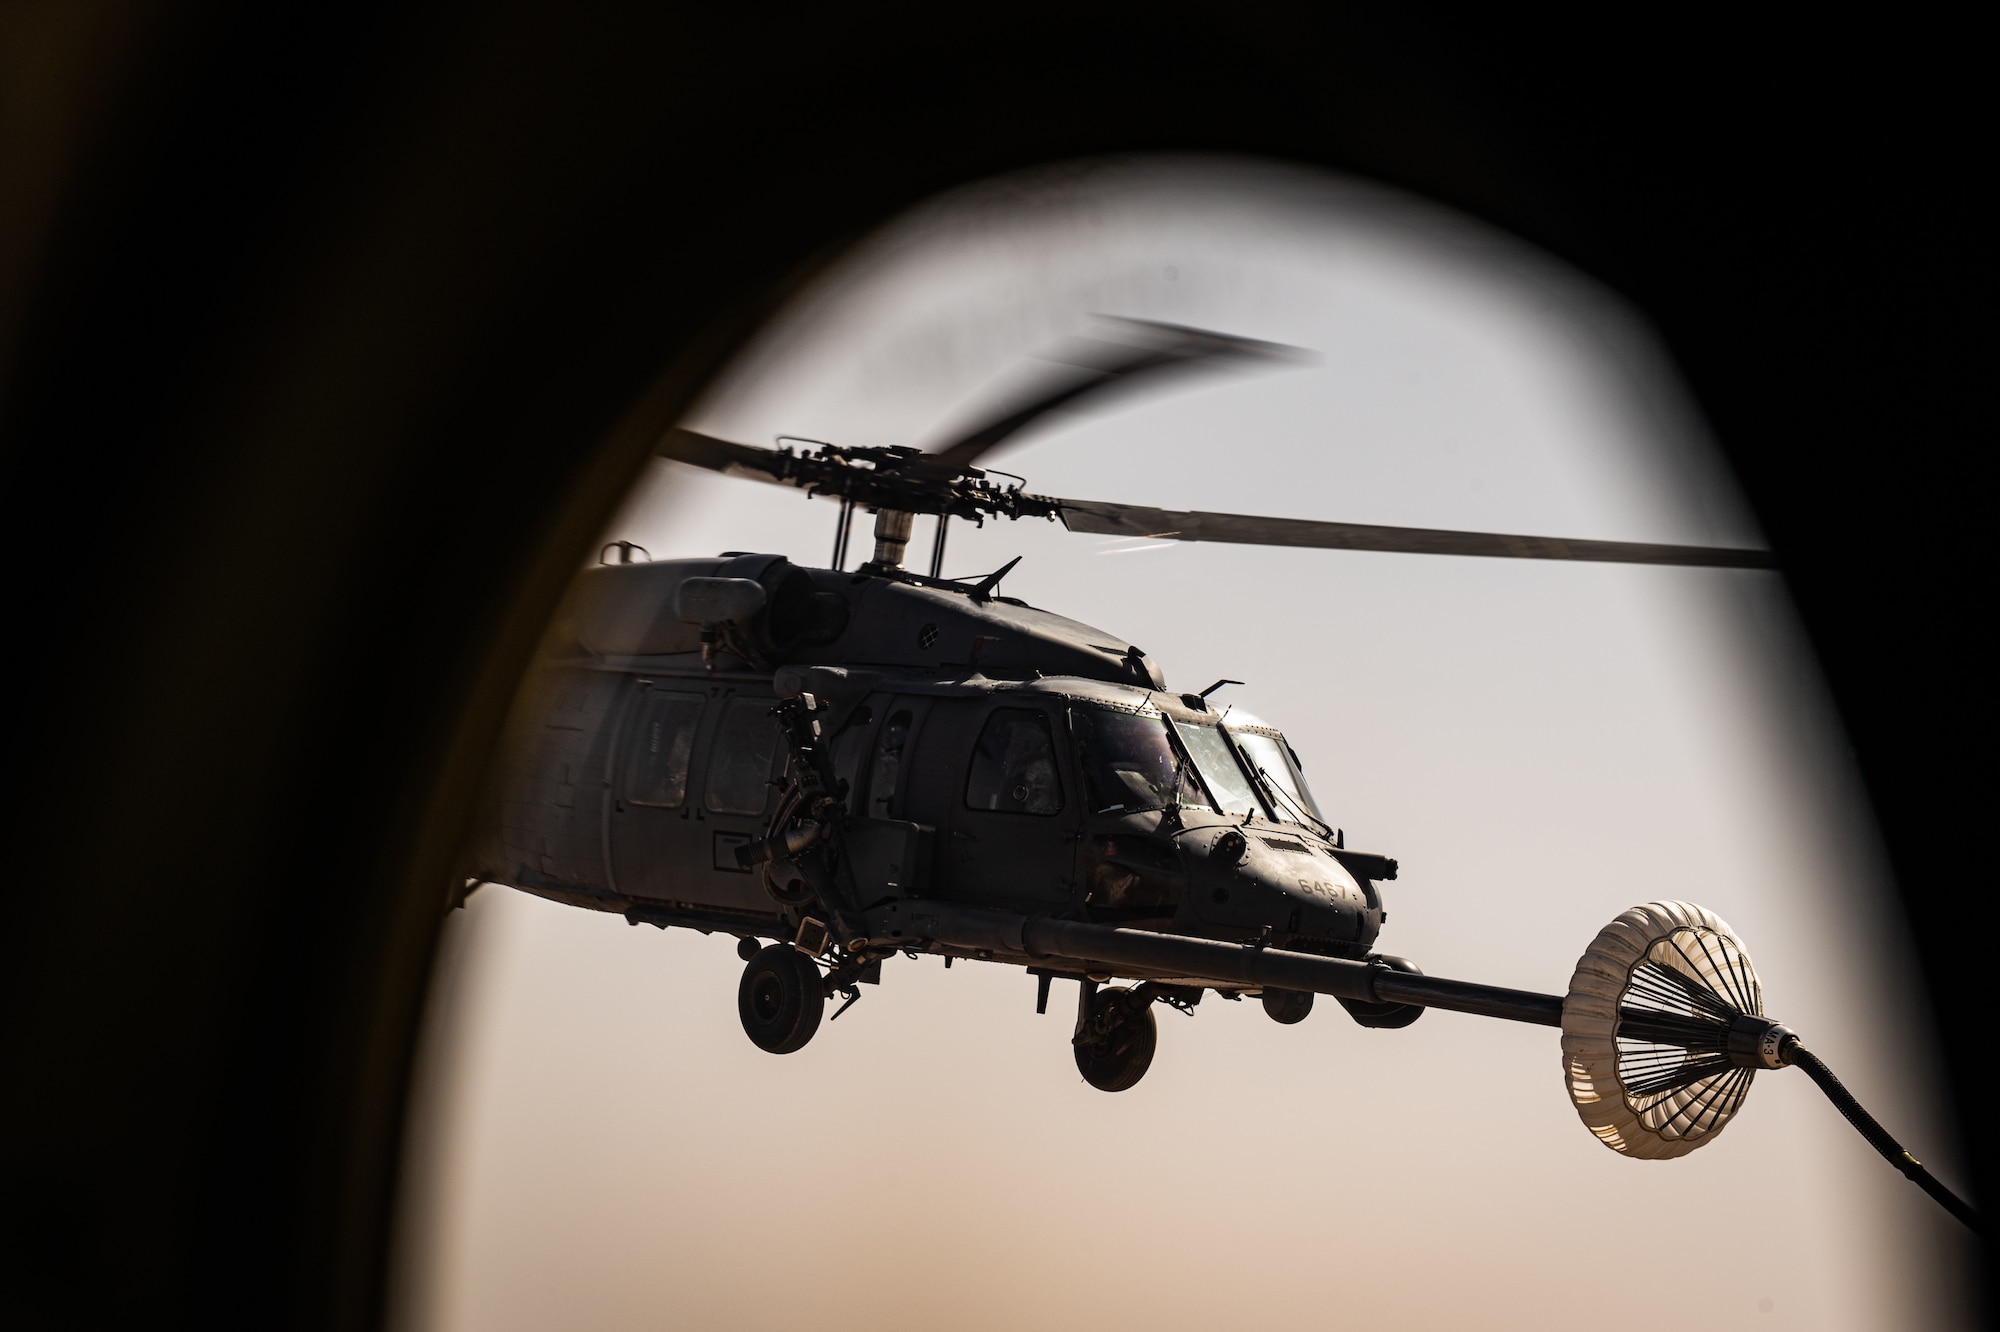 A 332d Air Expeditionary Wing HH-60G Pave Hawk helicopter receives fuel from an HC-130J Combat King II aircraft, also assigned to the 332d AEW, in Southwest Asia June 12, 2022. The primary mission of the Pave Hawk is to conduct day or night personnel recovery operations into hostile environments to recover isolated personnel during conflict. The HH-60G is also tasked to perform military operations other than conflict, including civil search and rescue, medical evacuation, disaster response, humanitarian assistance, security cooperation/aviation advisory, NASA space flight support, and rescue command and control. (U.S. Air Force photo by Master Sgt. Christopher Parr)